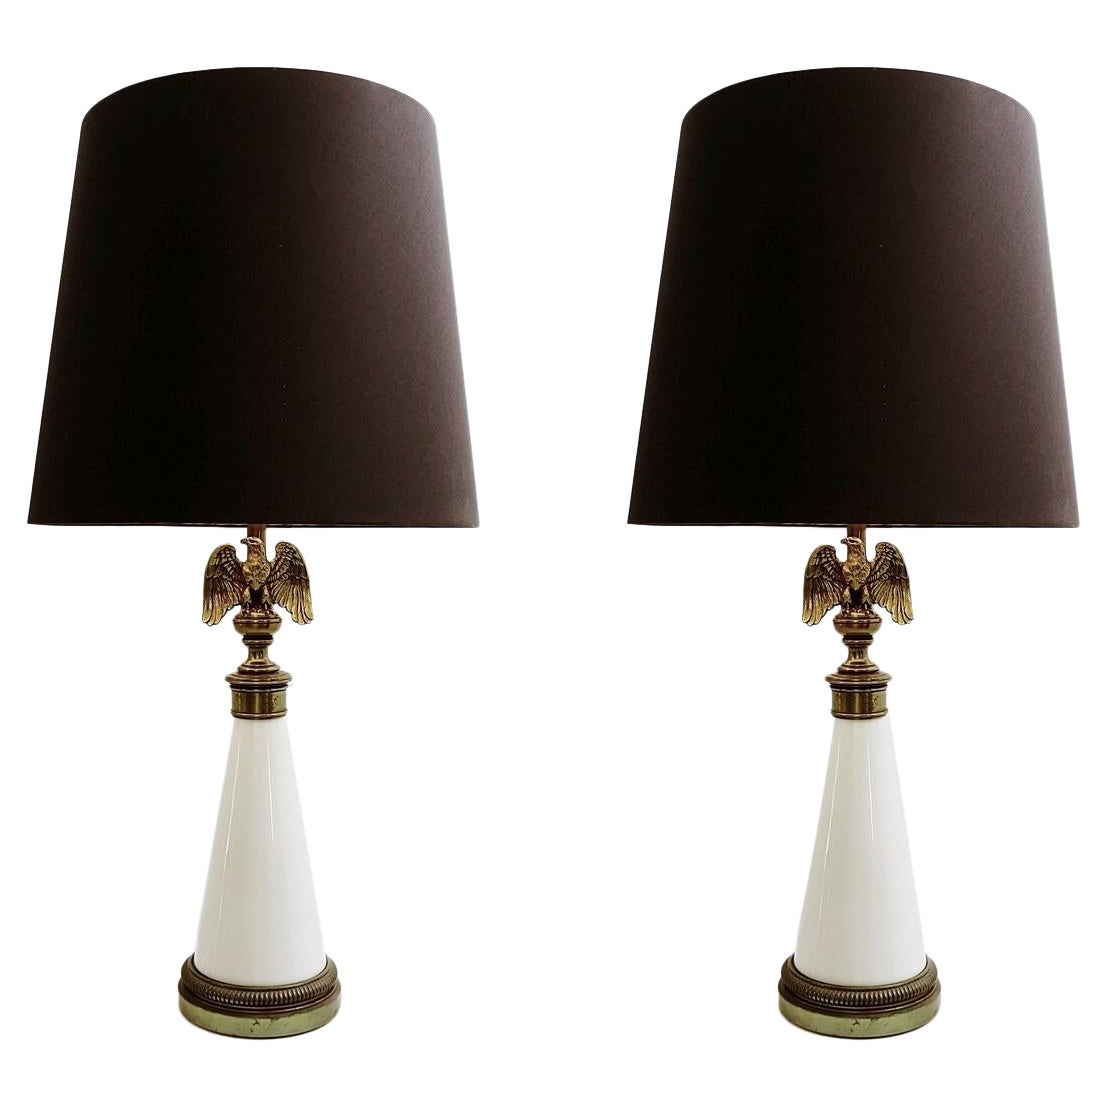 Pair of Midcentury American Eagle Table Lamps, Ceramic and Brass